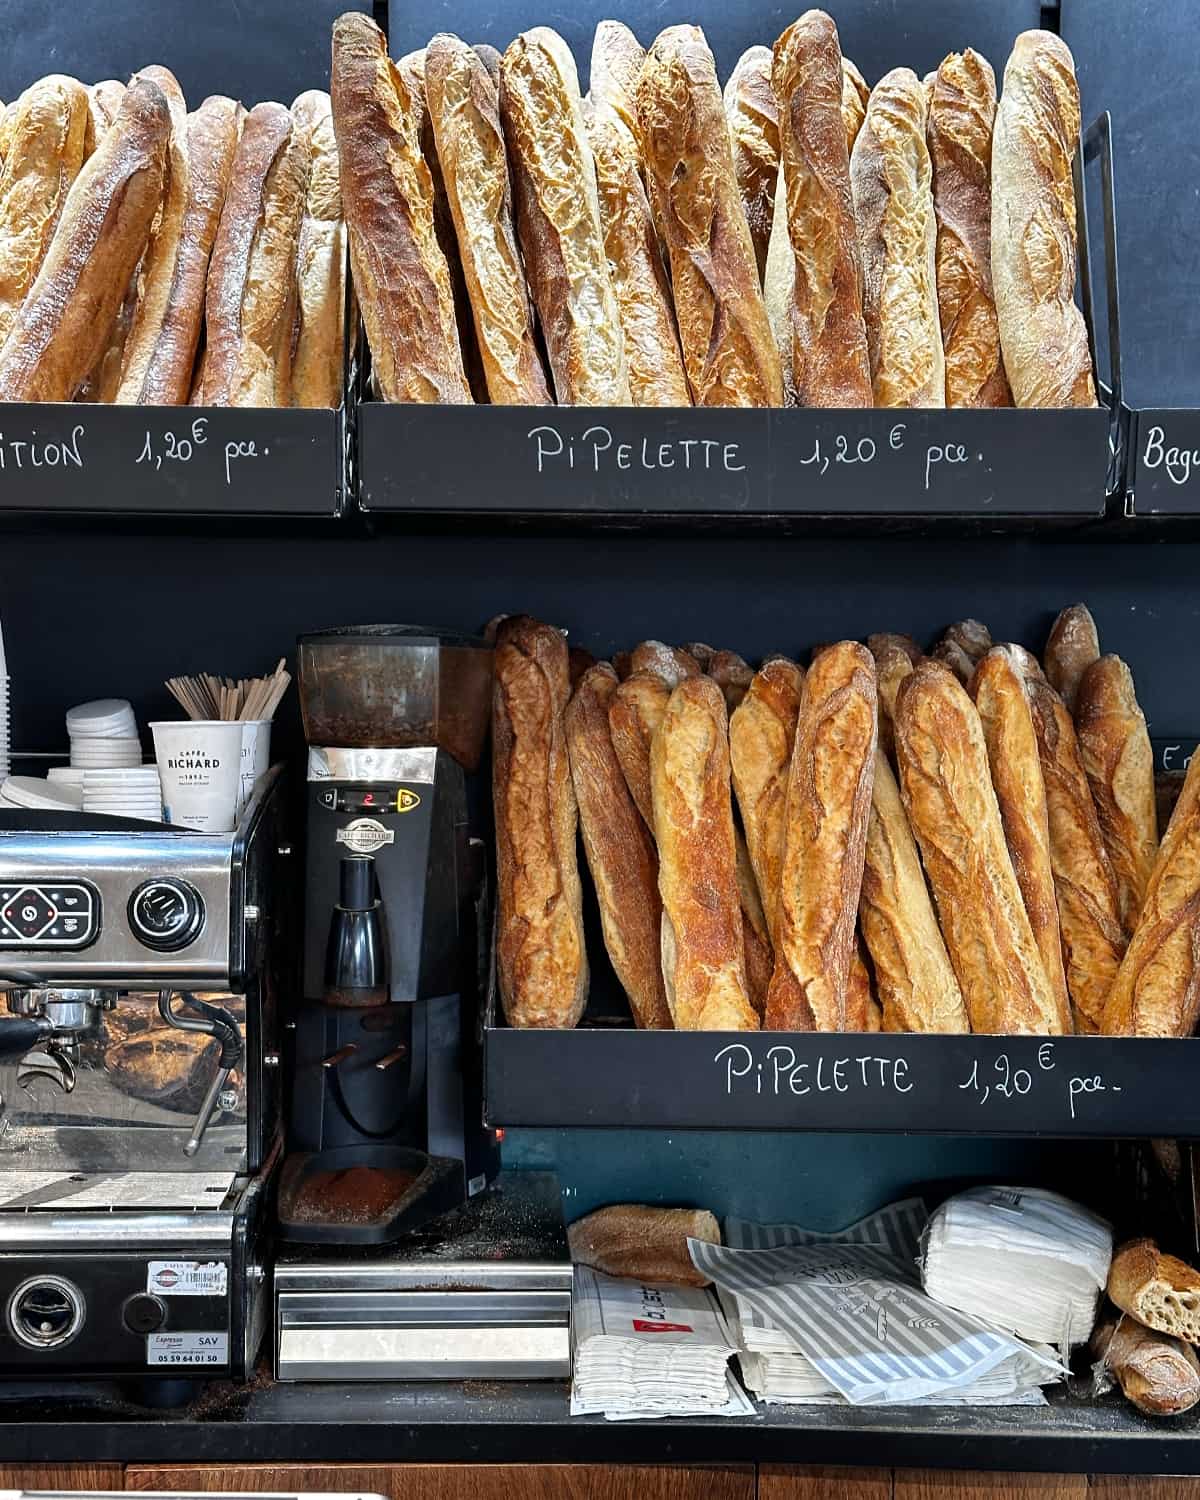 Baguettes displayed on the shelves of a French bakery